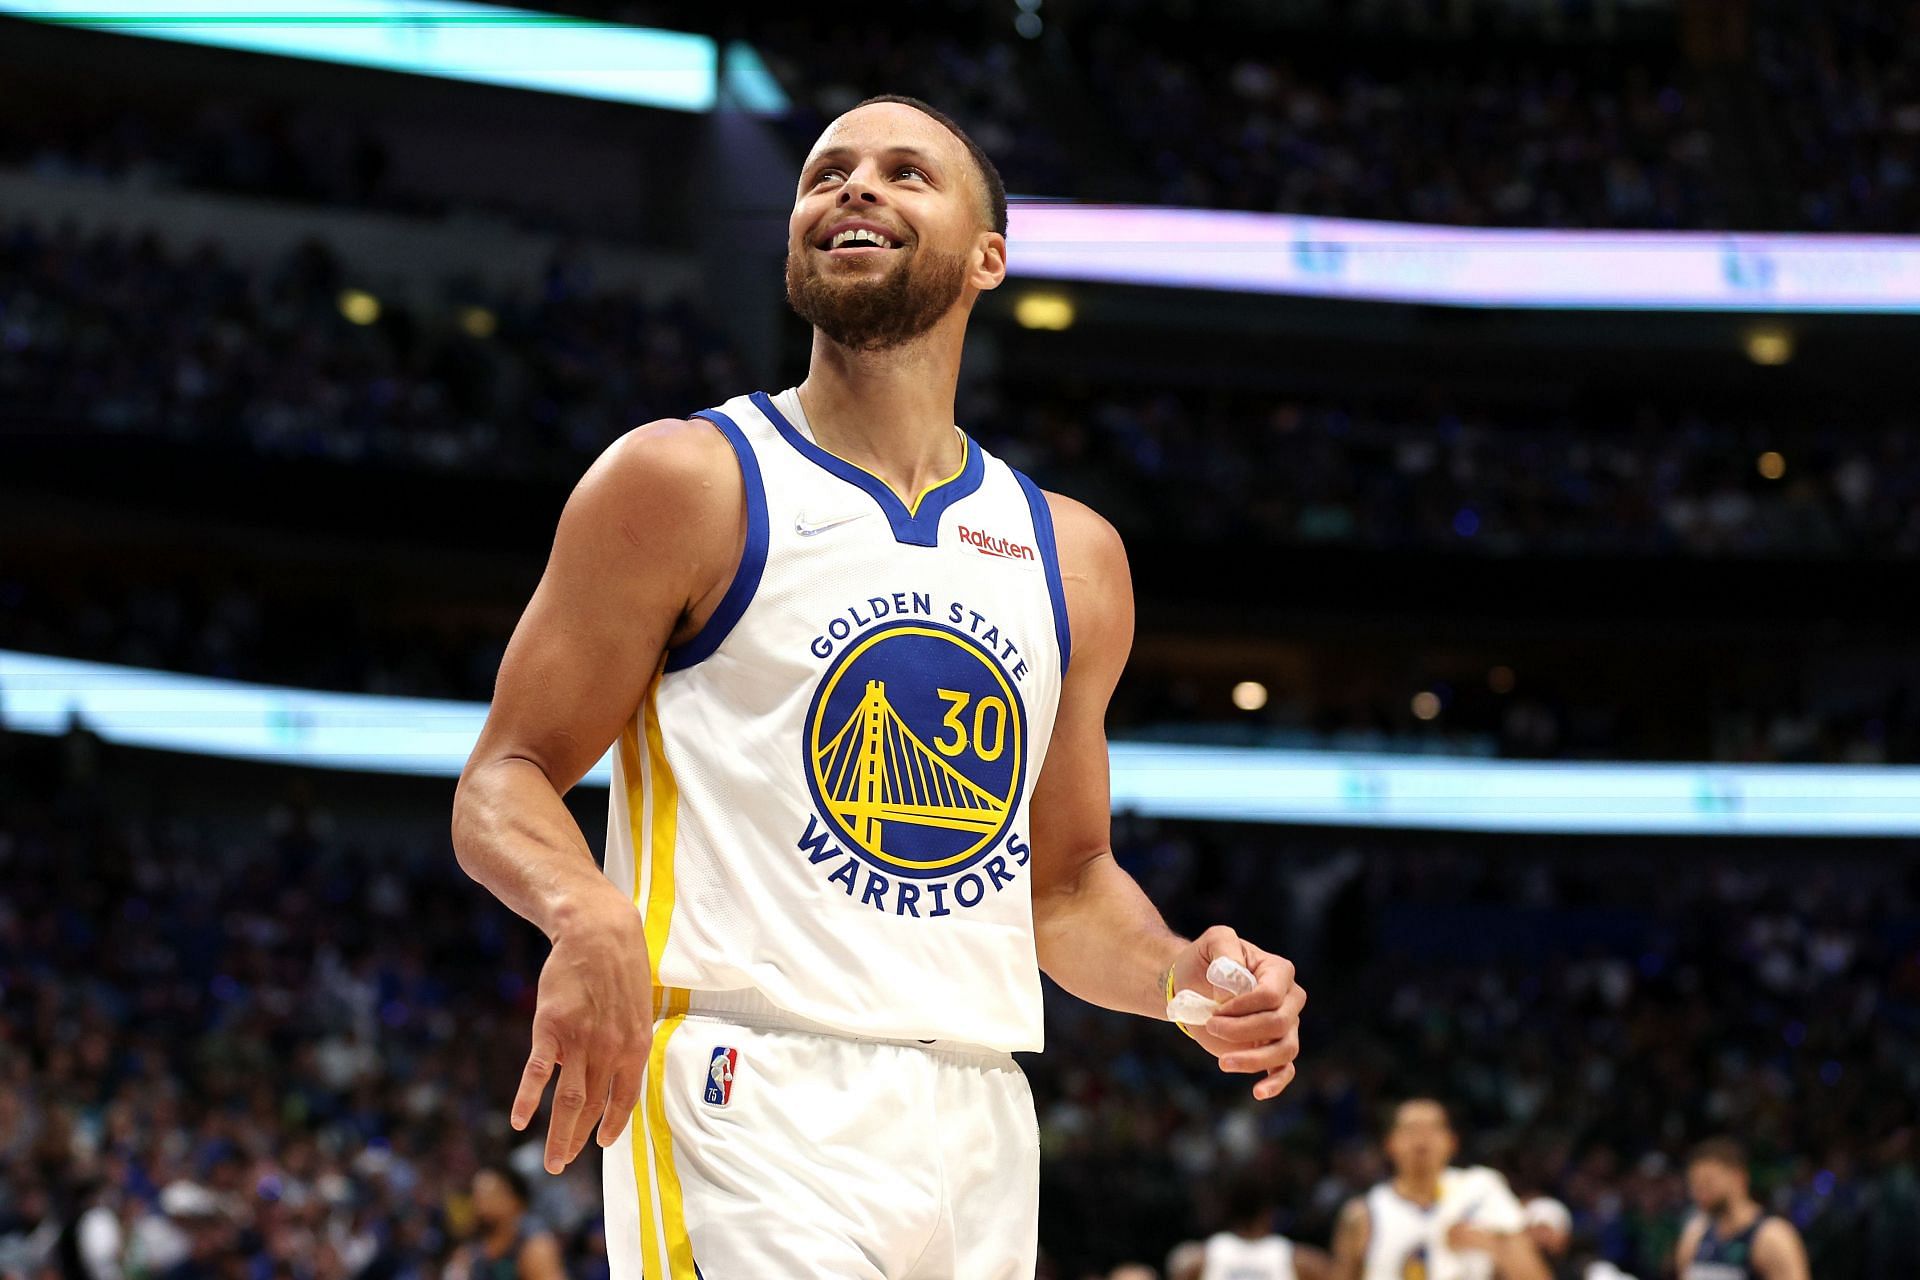 Golden State Warriors completely shut down any hopes of the Dallas Mavericks to make it to the NBA finals on Sunday night, taking a 3-0 lead in the Western Conference finals.